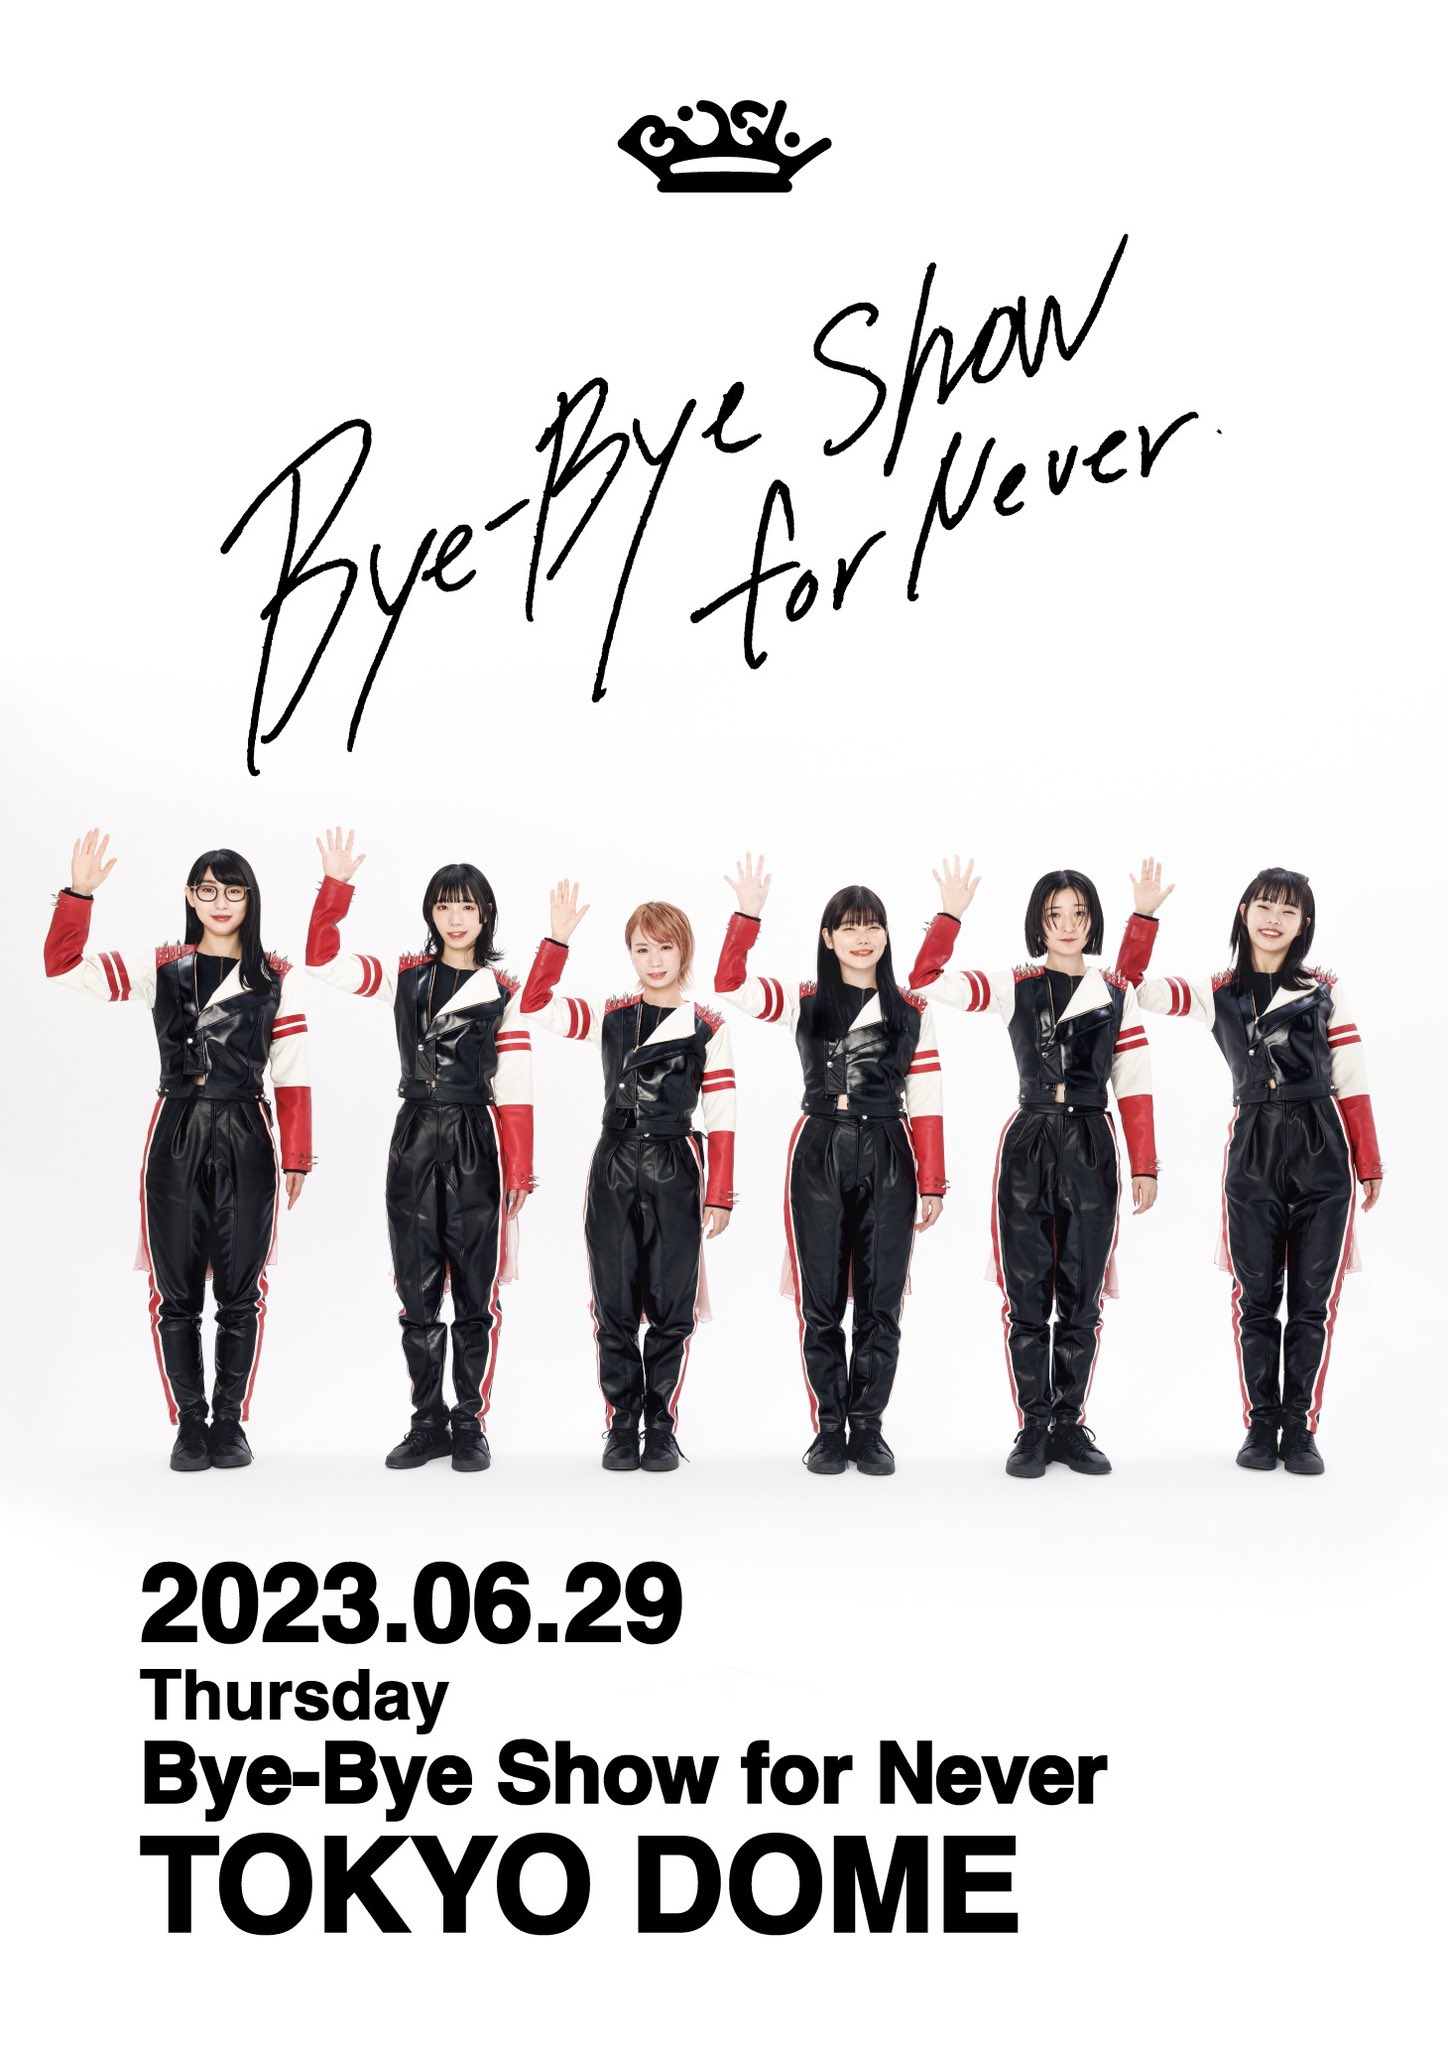 BiSHBiSH/Bye-Bye Show for Never atTOKYODOME